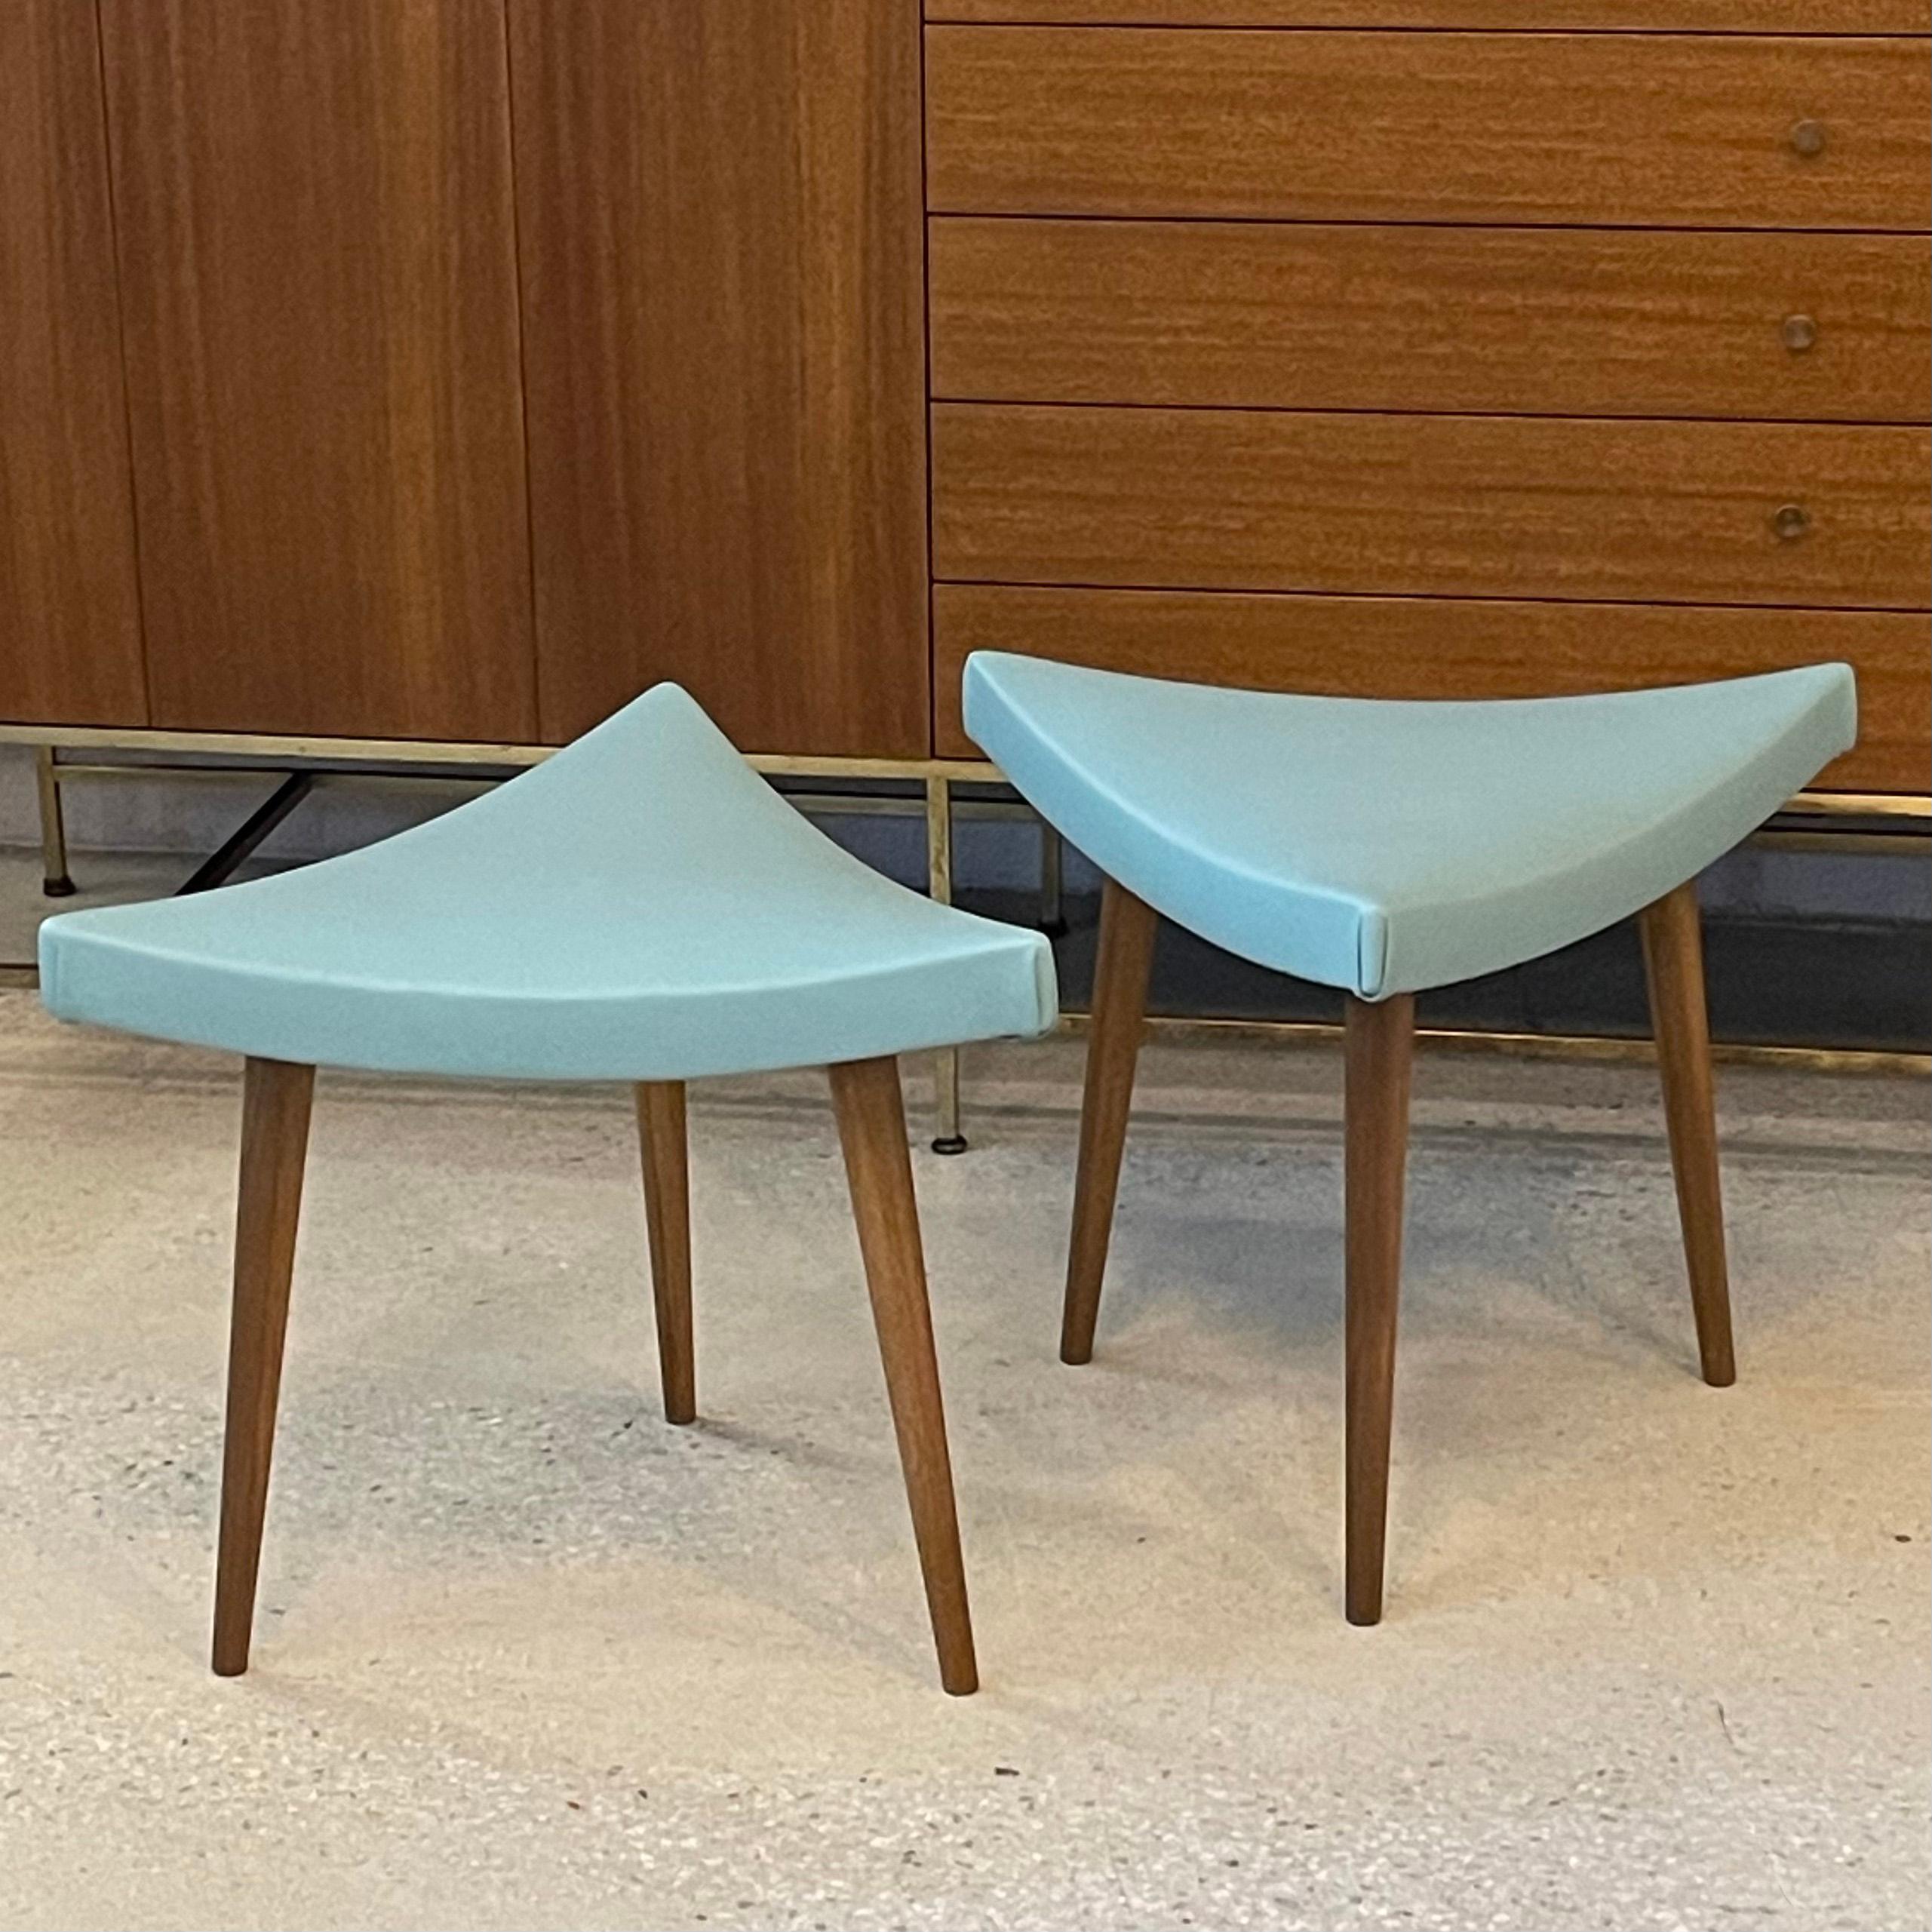 cFsignature, limited edition, custom, mid-century modern style stools feature gently sloped, triangular tops with tapered maple legs. Four light blue leather stools are available now. The stools can be made to order in the fabric and leather of your